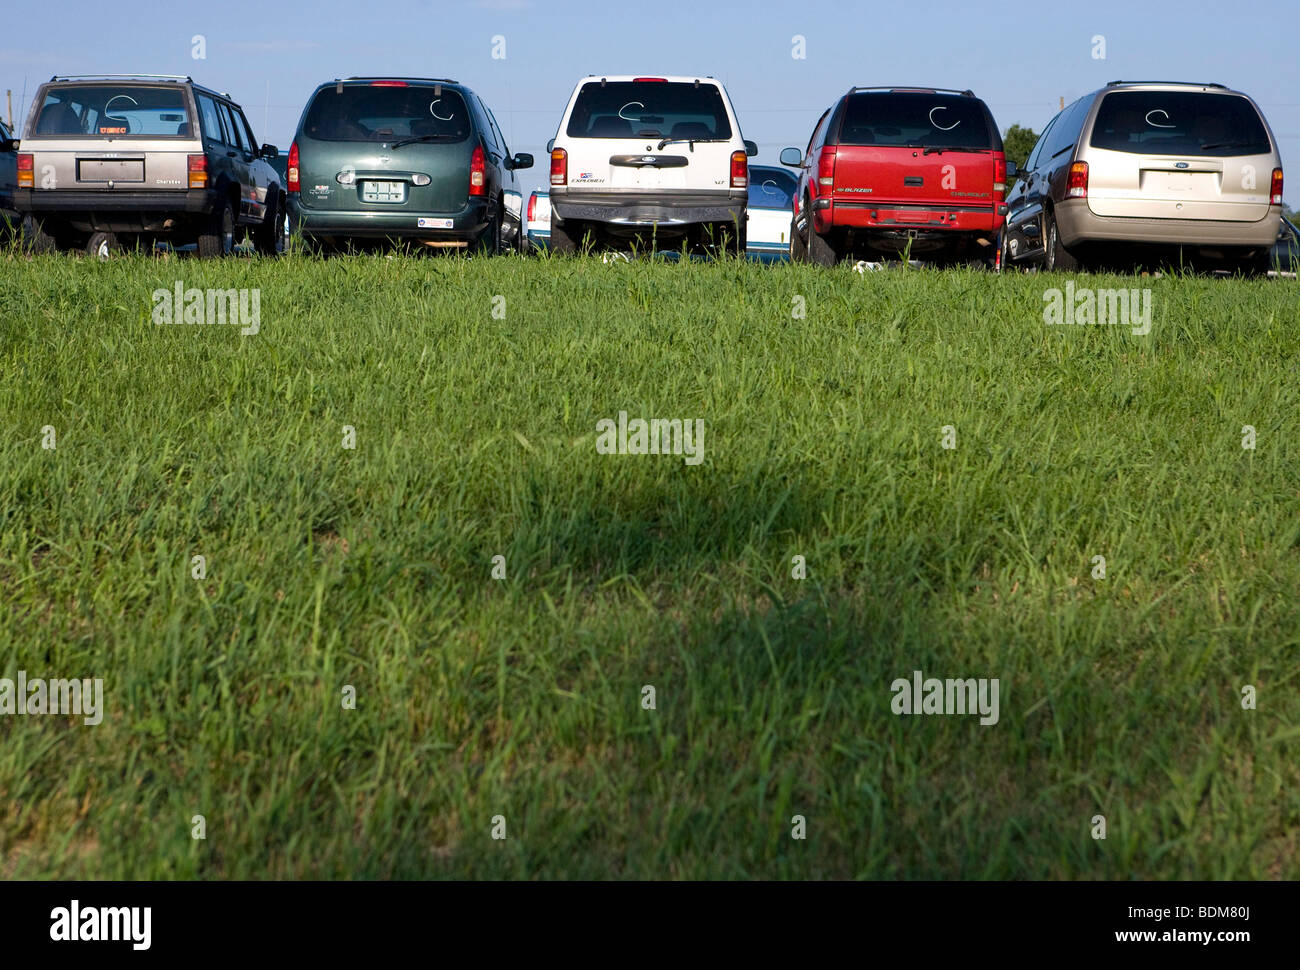 15 August 2009 – Hagerstown, Maryland – 'Clunker' vehicles pile up on auto dealer lots. Stock Photo